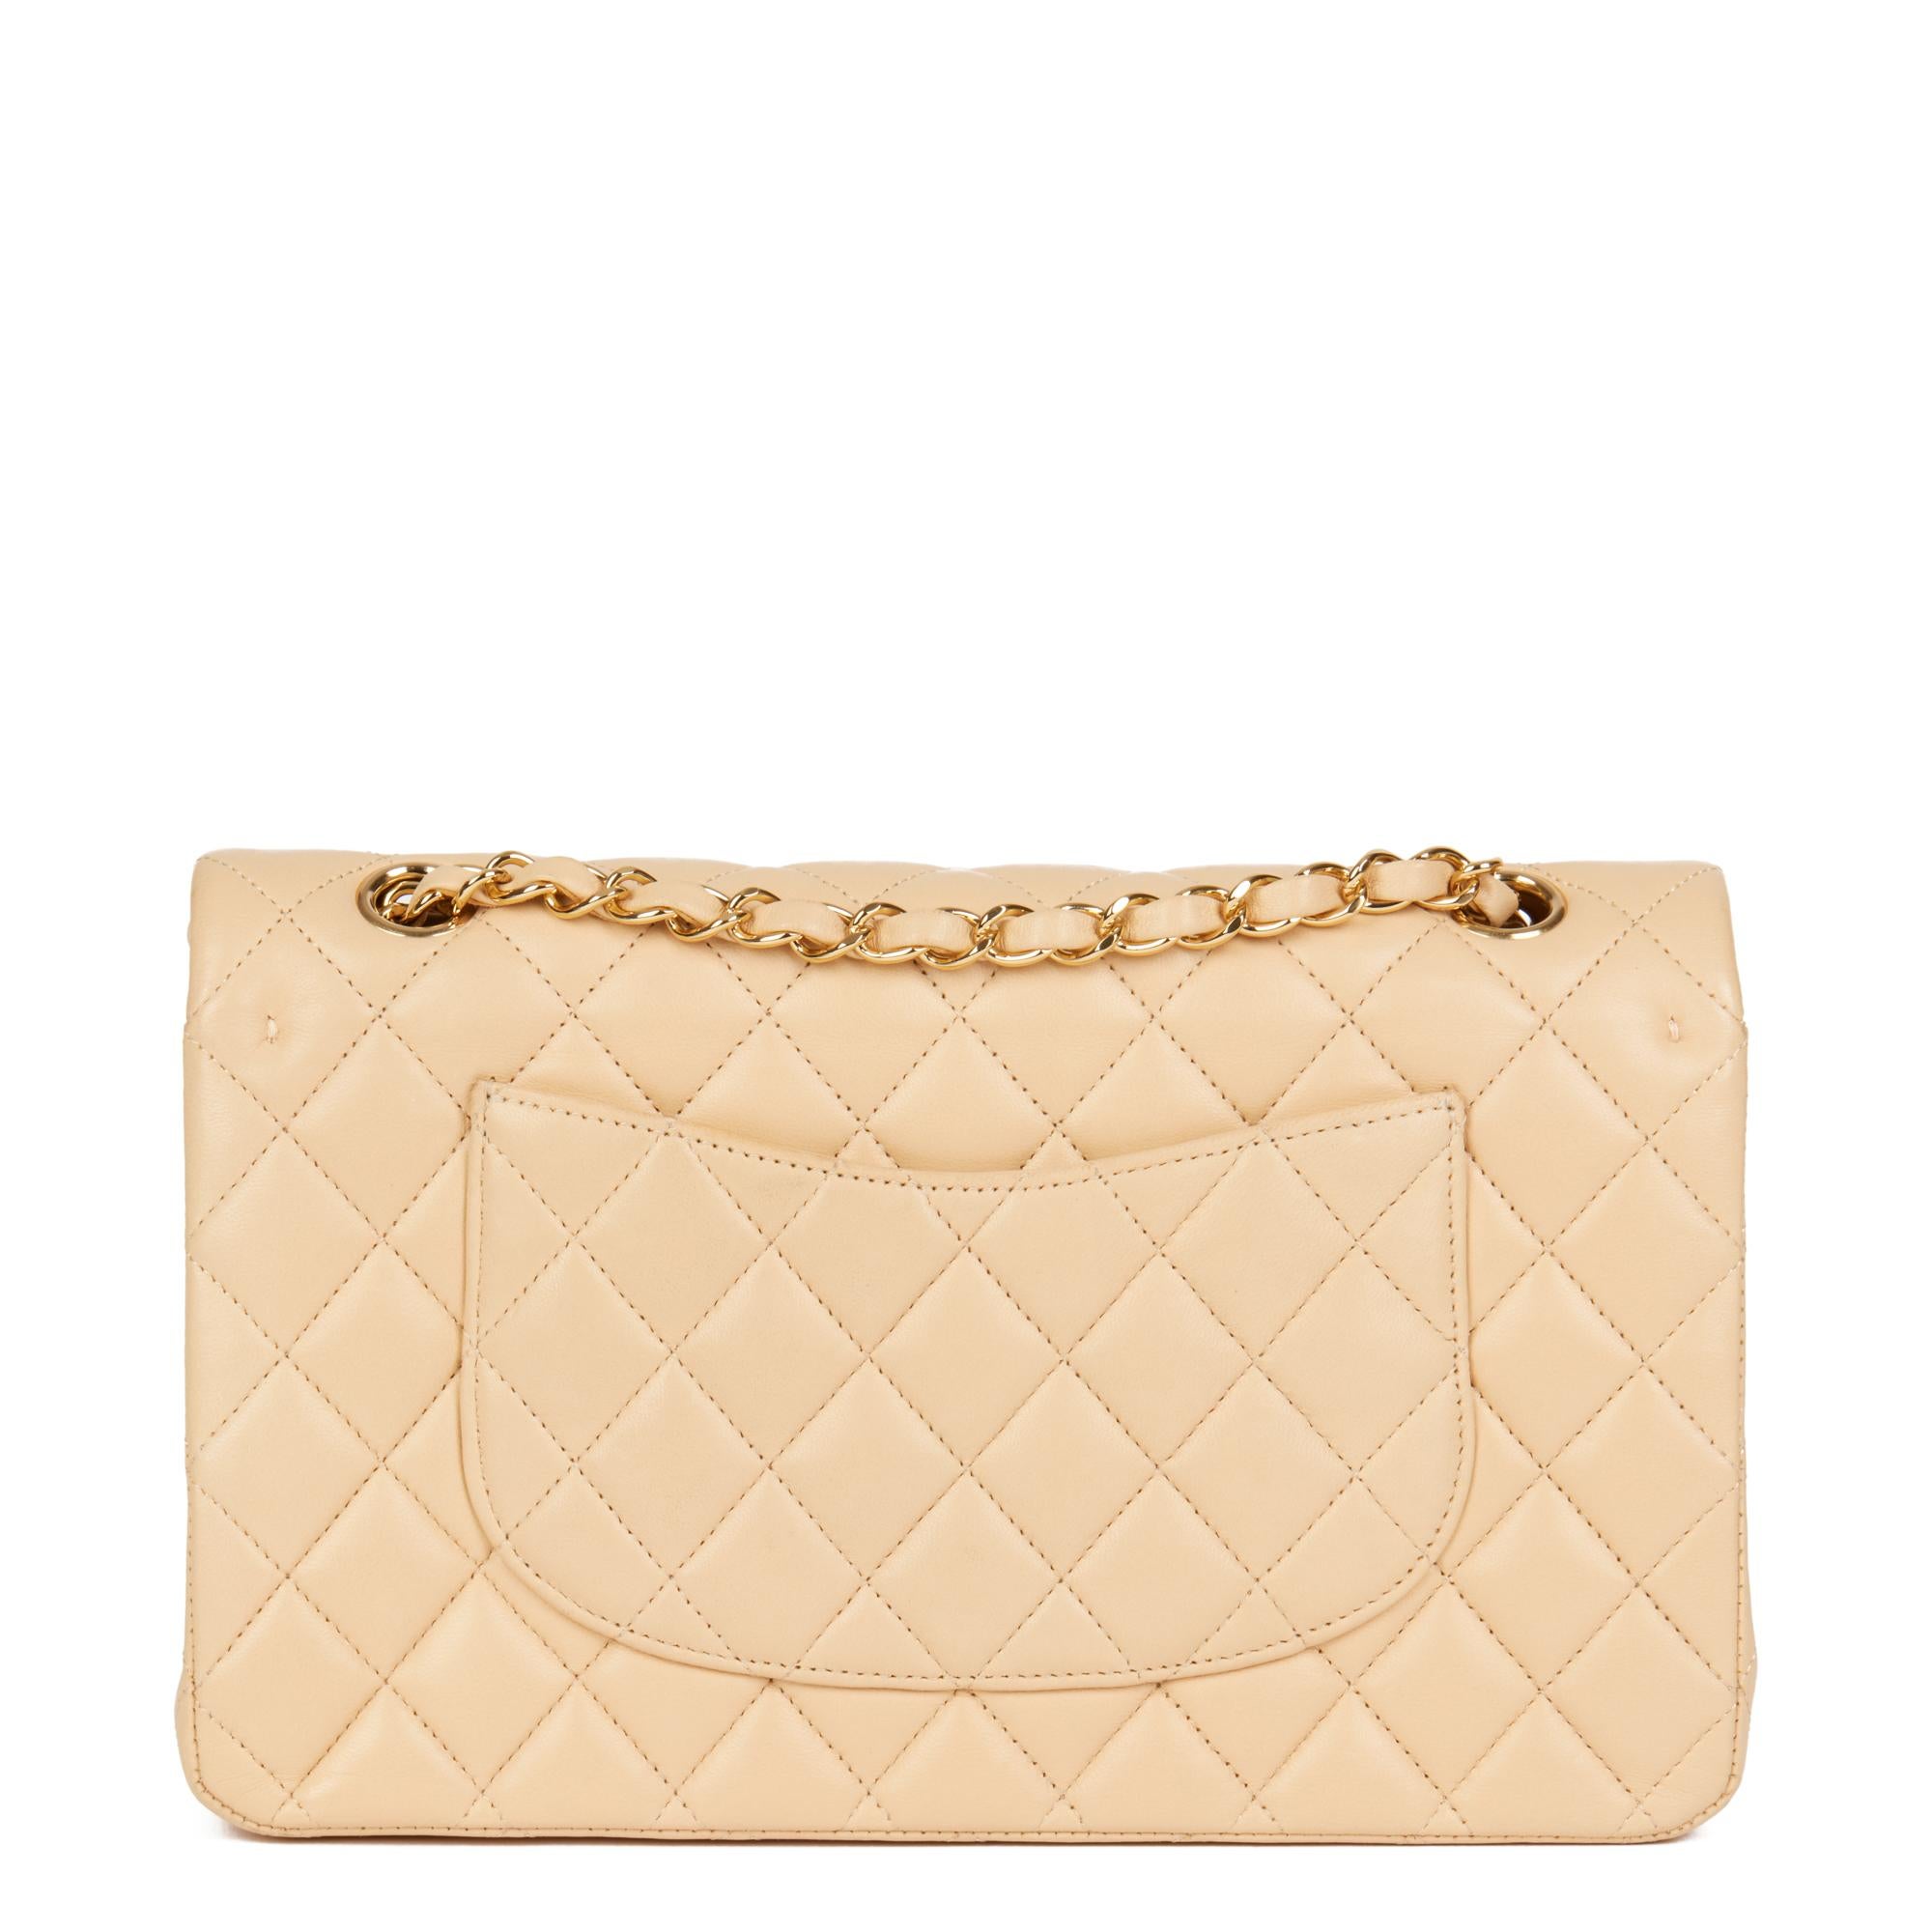 Women's CHANEL Beige Quilted Lambskin Medium Classic Double Flap Bag